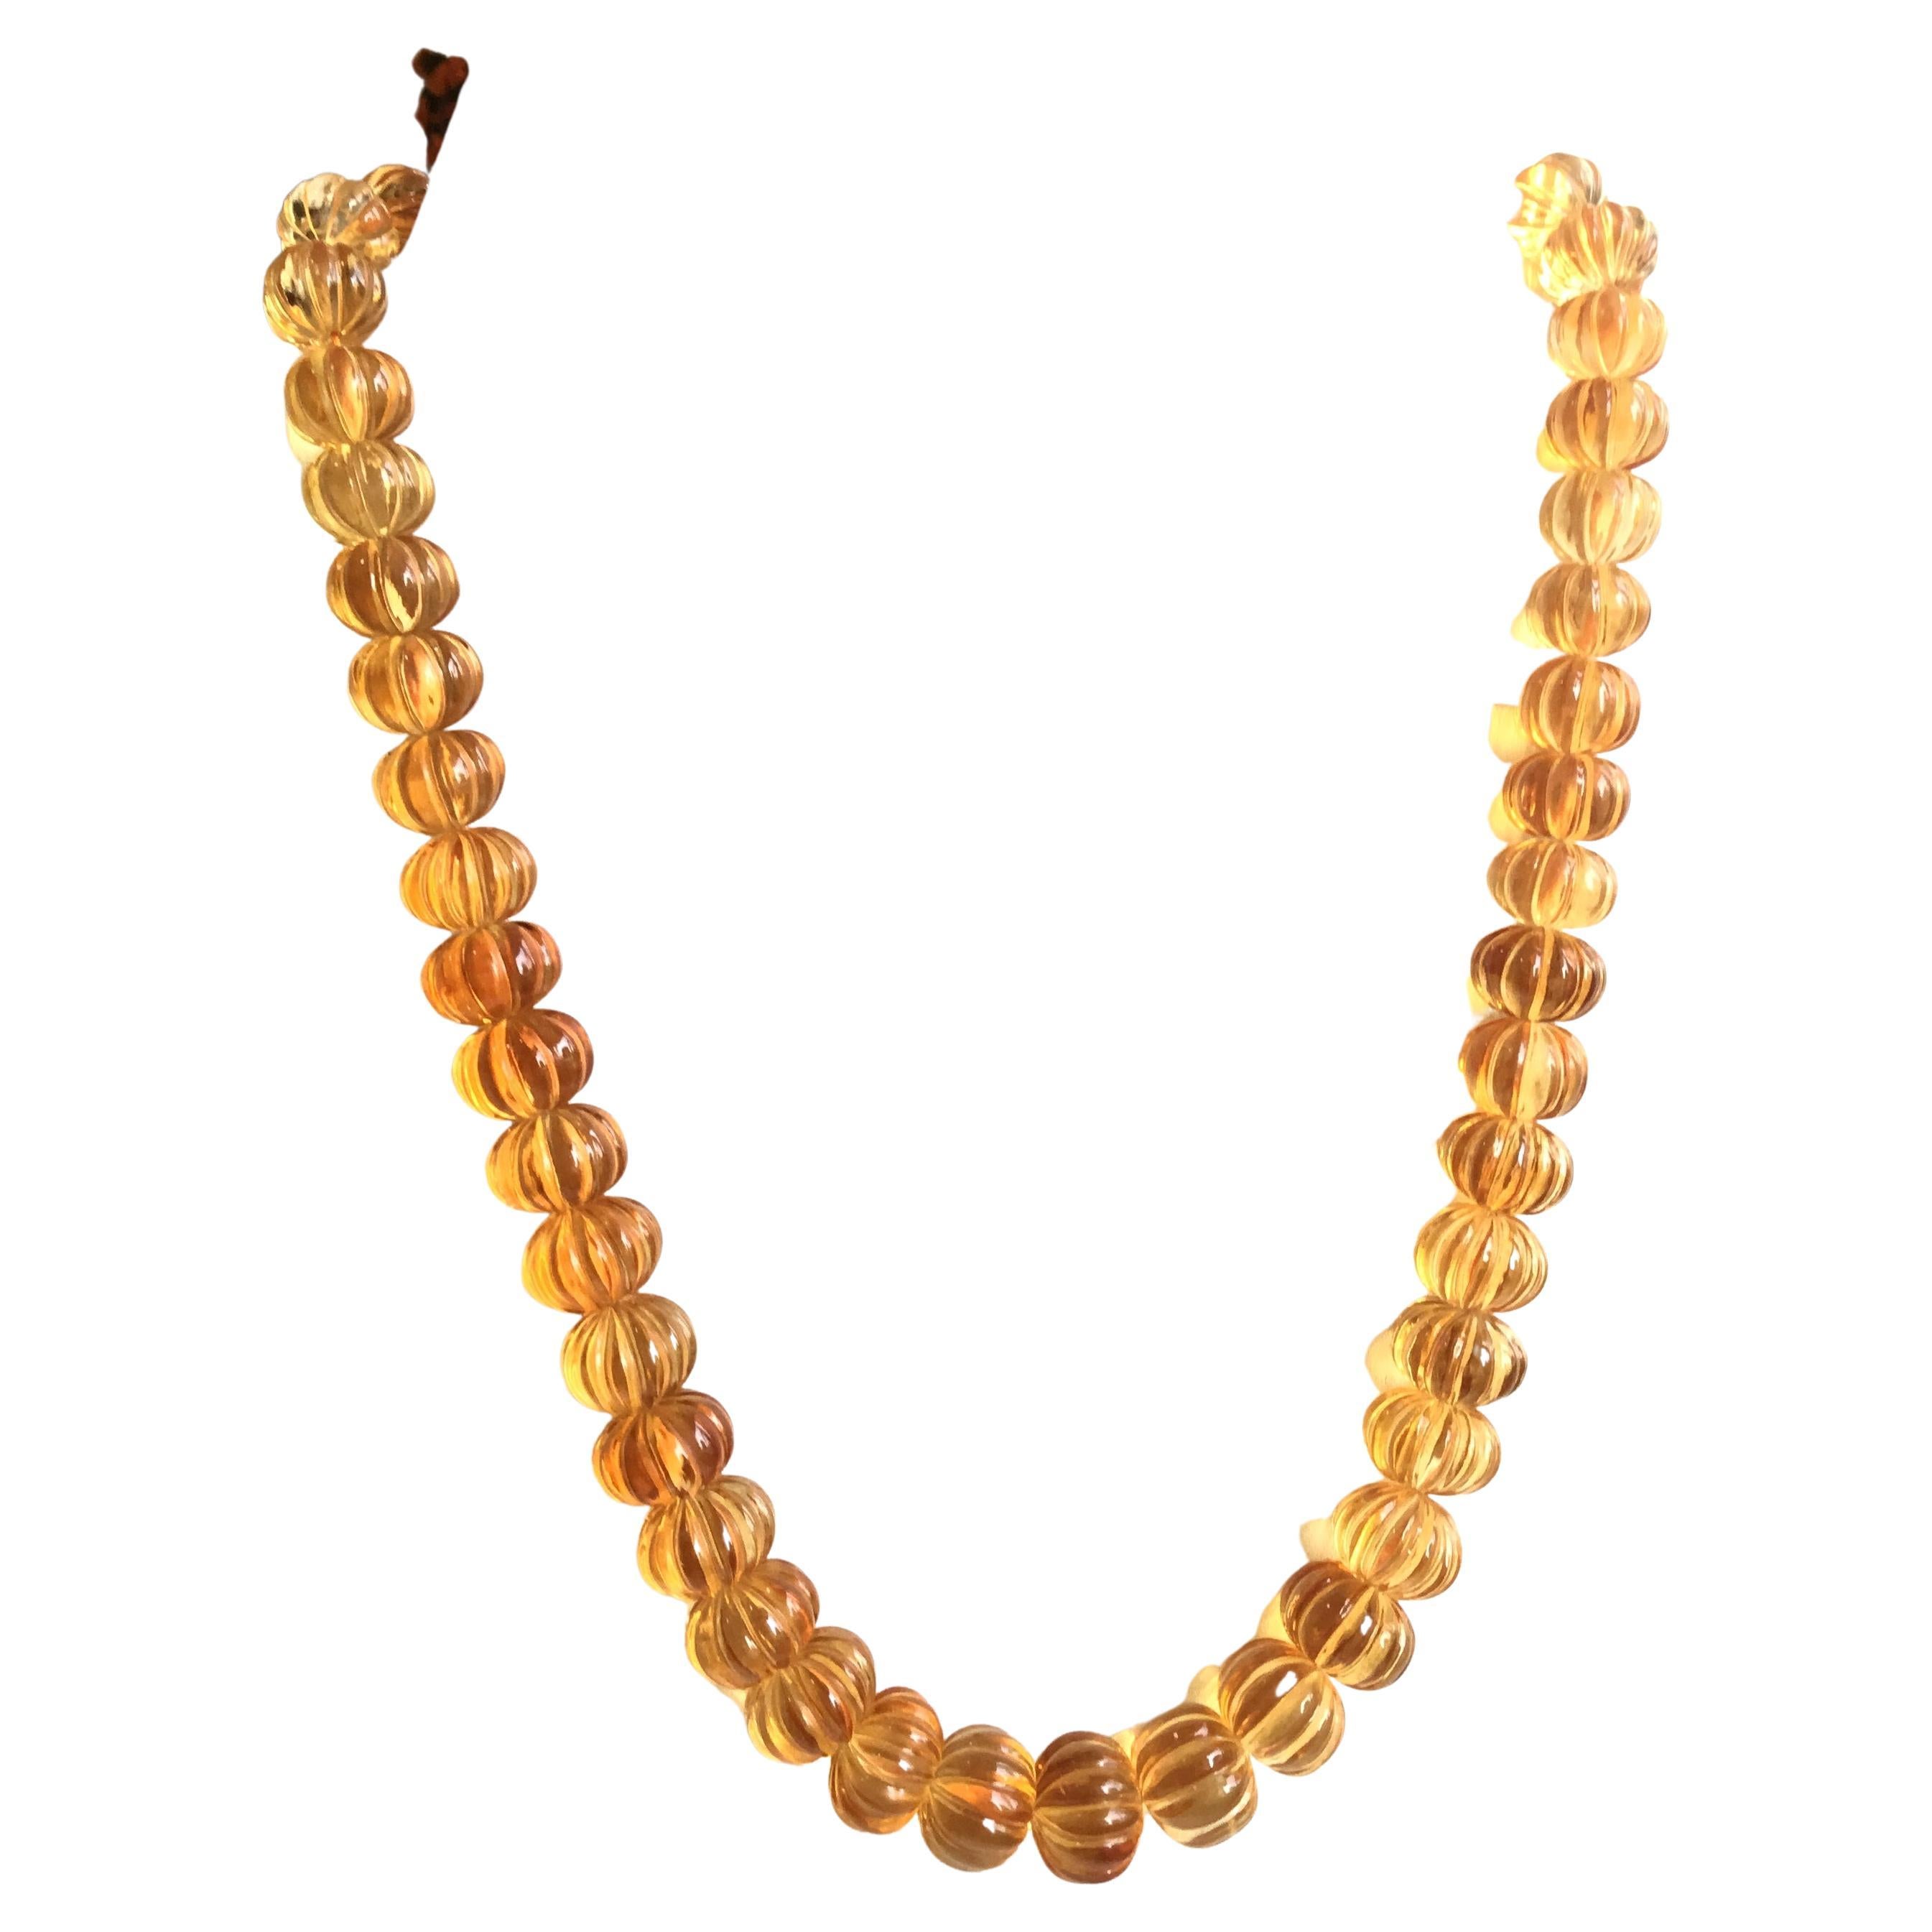 Top Quality Citrine Carved Melon Beads Natural Gemstone Necklace